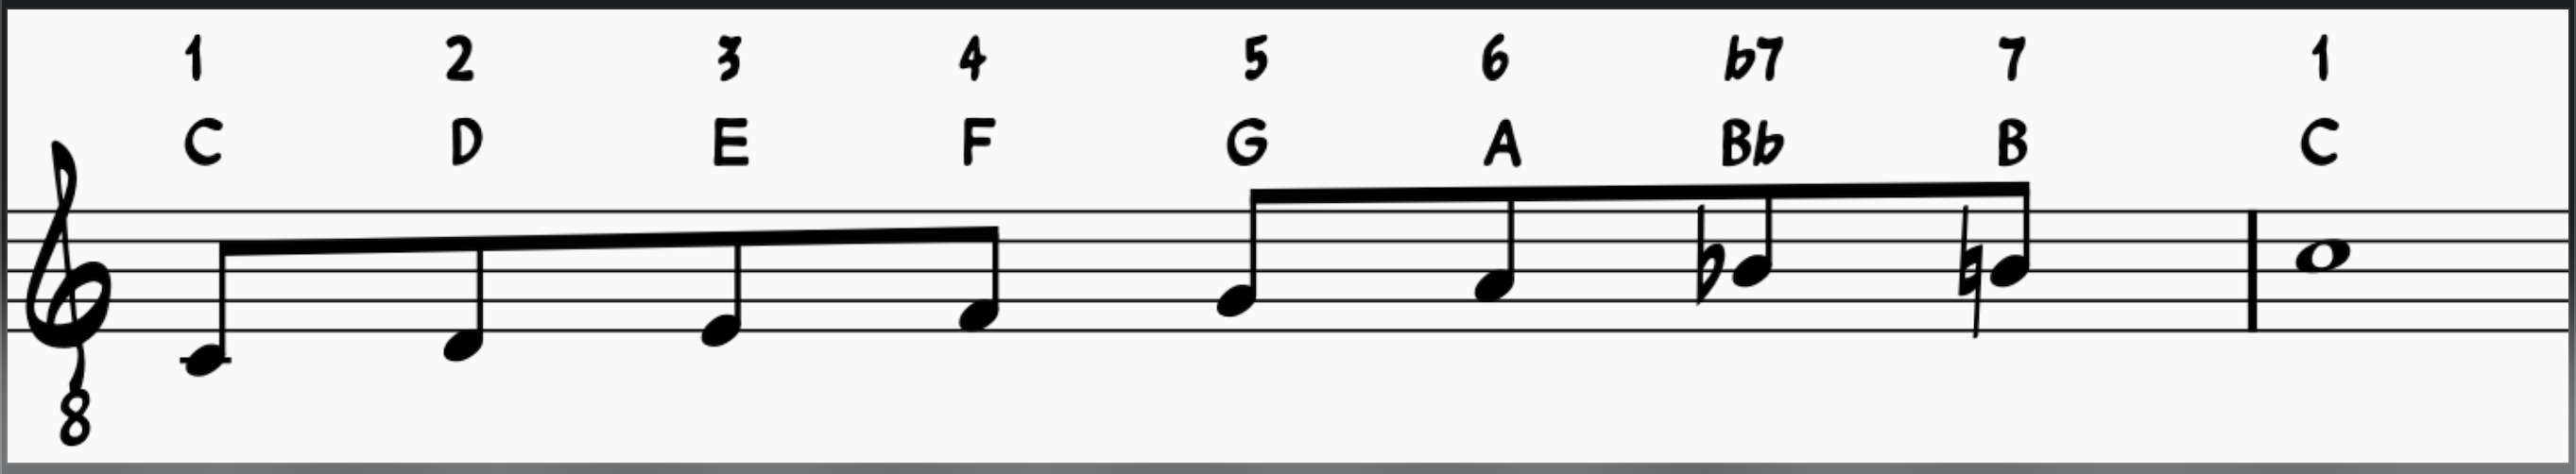 Playing over Blues chords: Bebop Dominant Scale